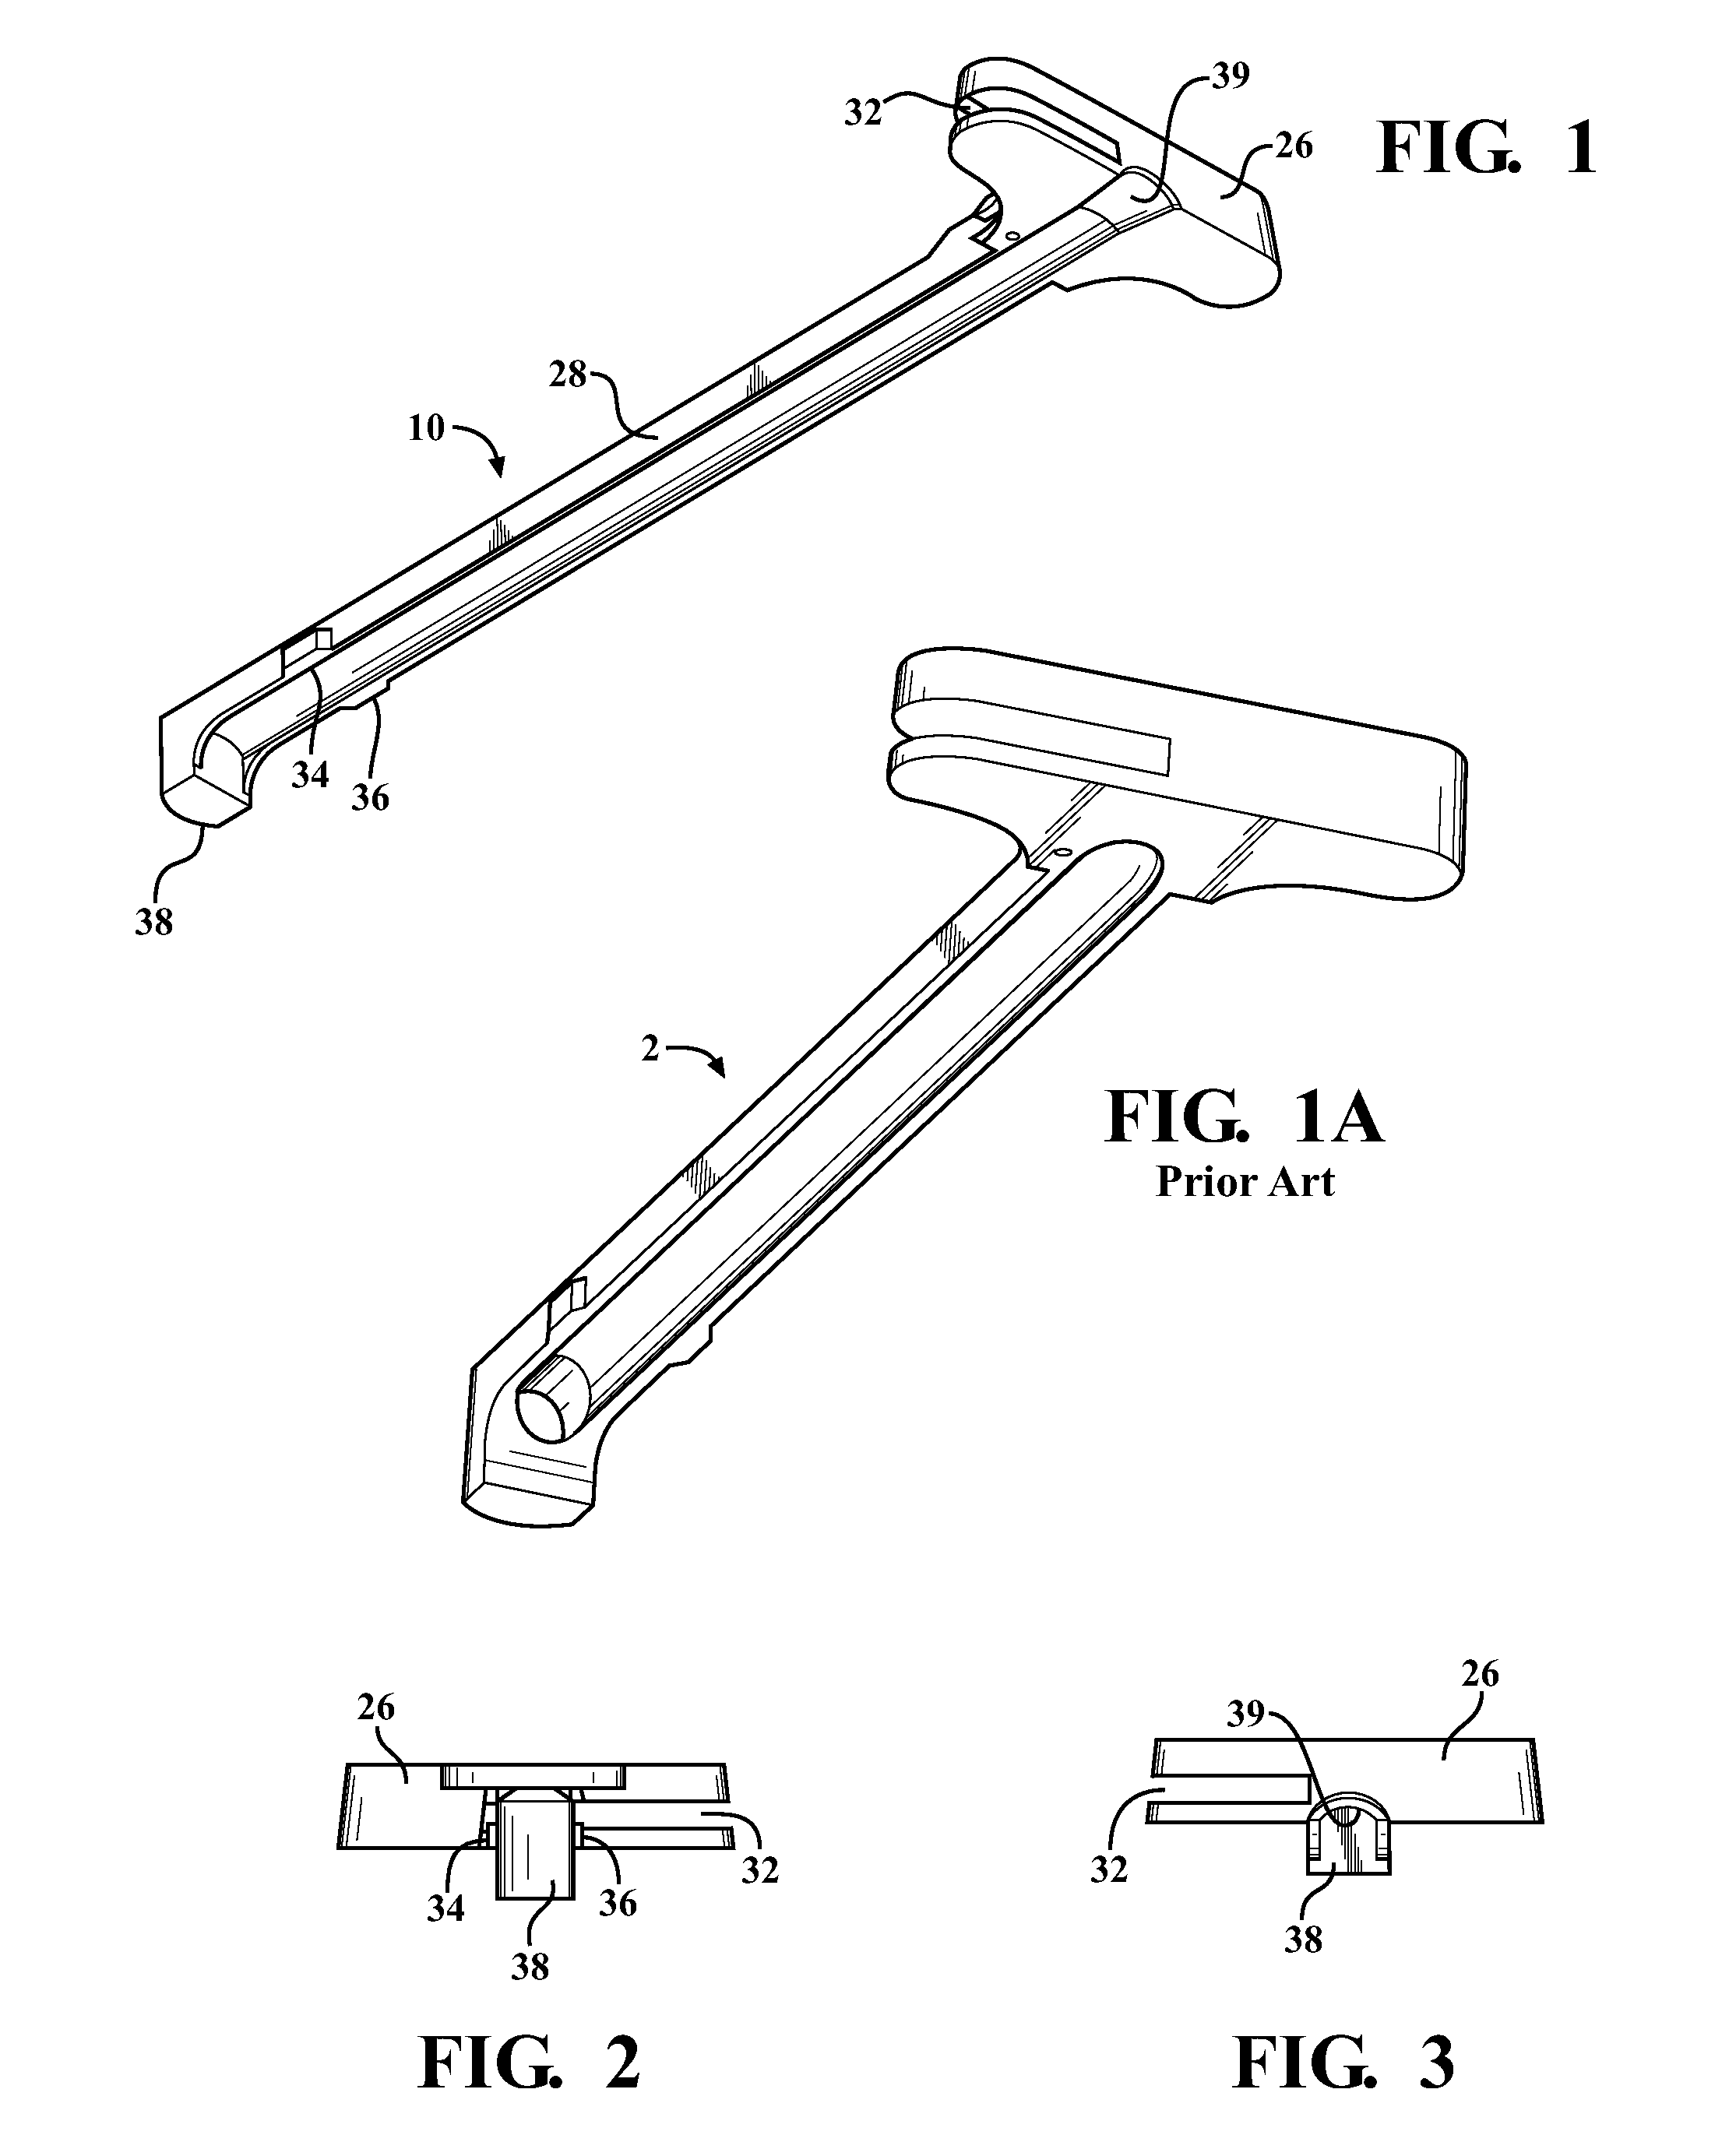 Anti jam, grooved and expanding charging handle for sub caliber actions